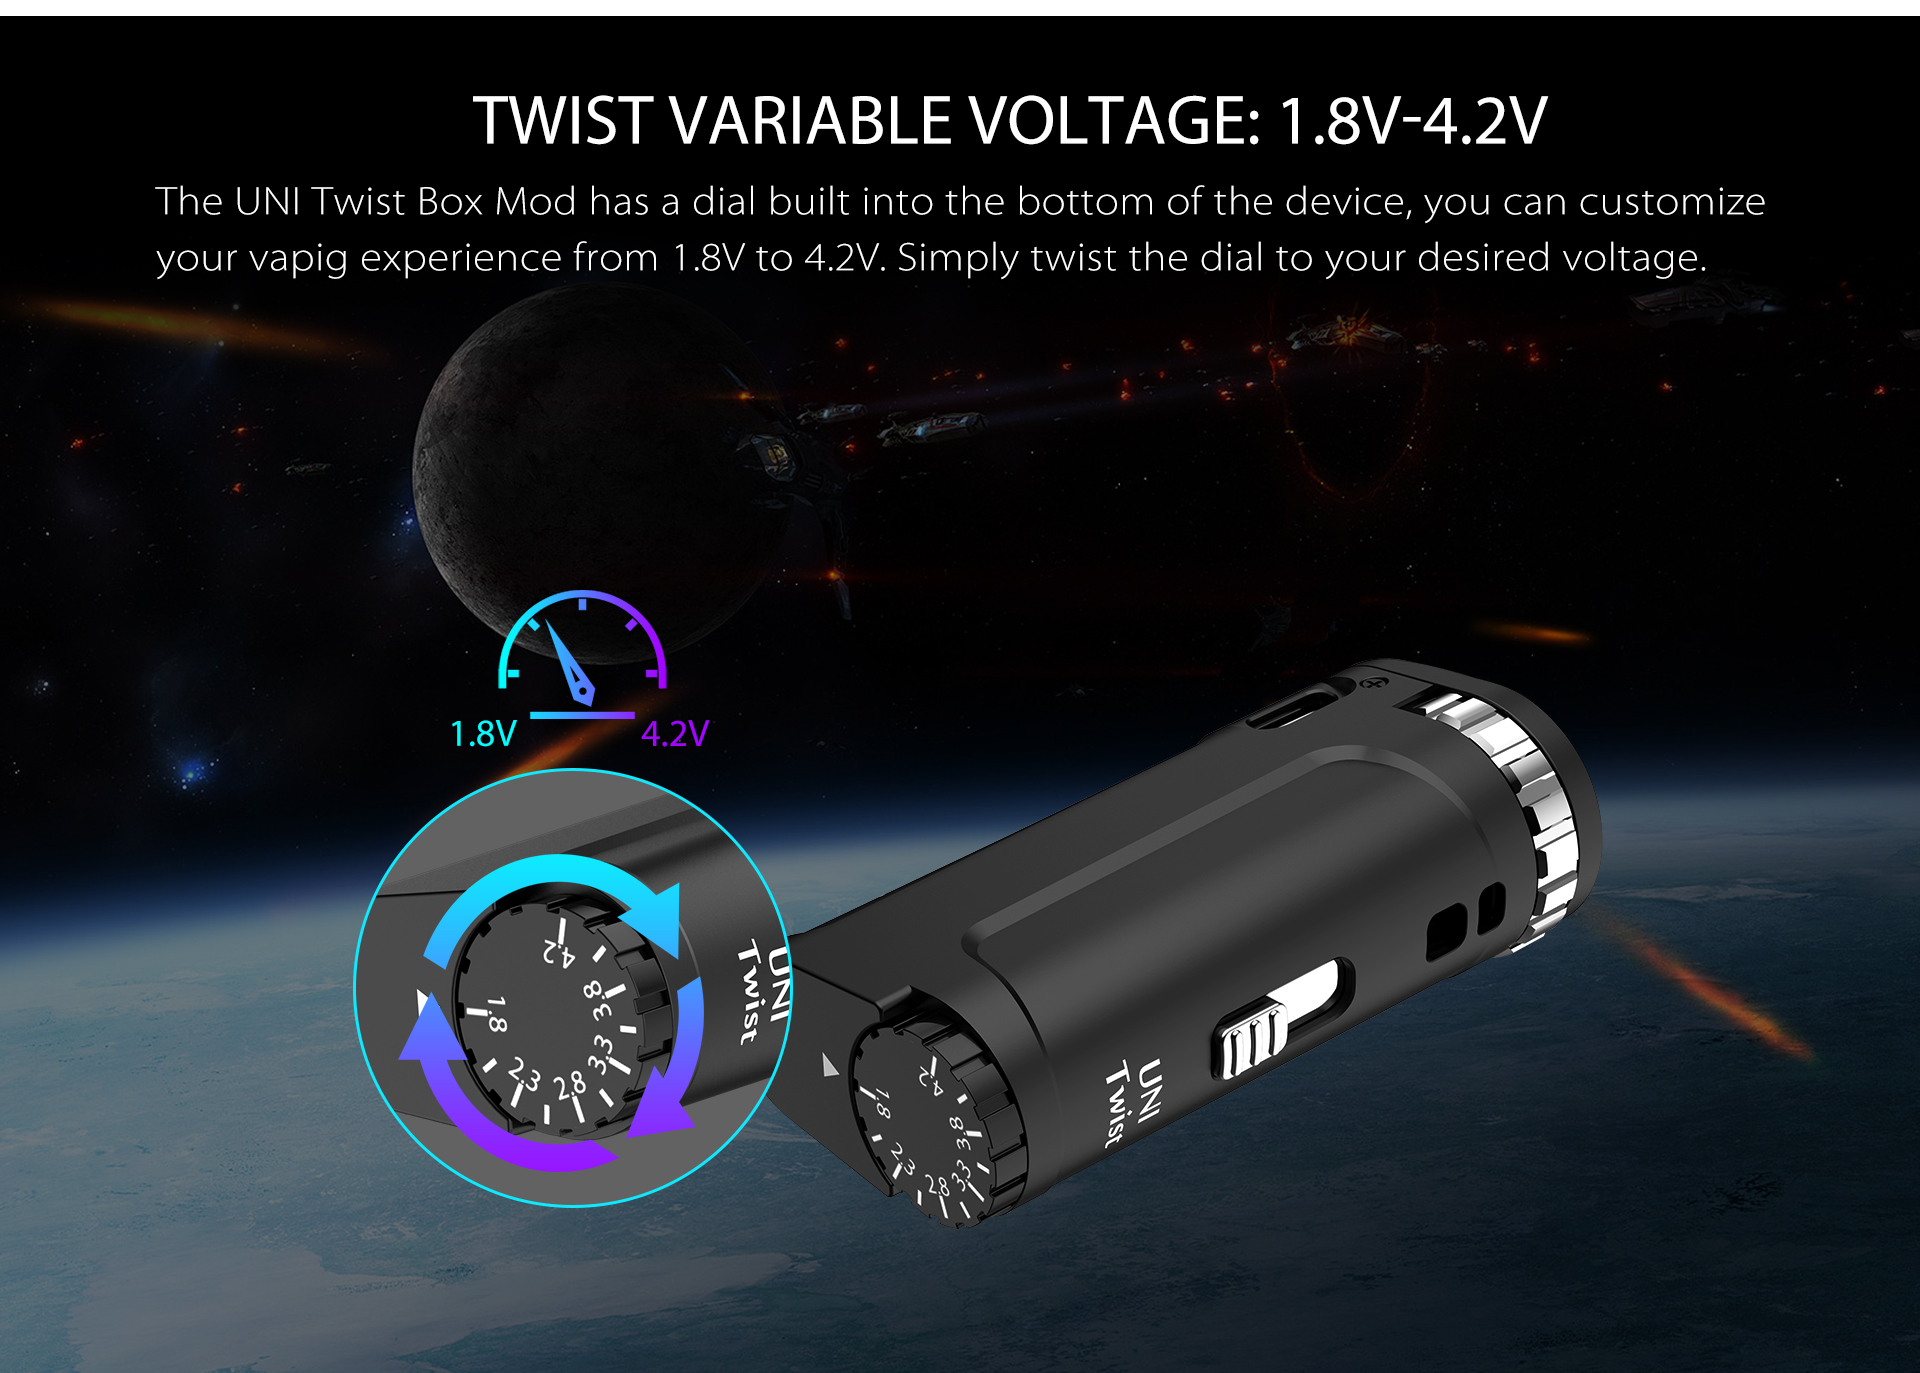 Yocan UNI Twist Universal Portable Mod has a dial built into the bottom of the device.